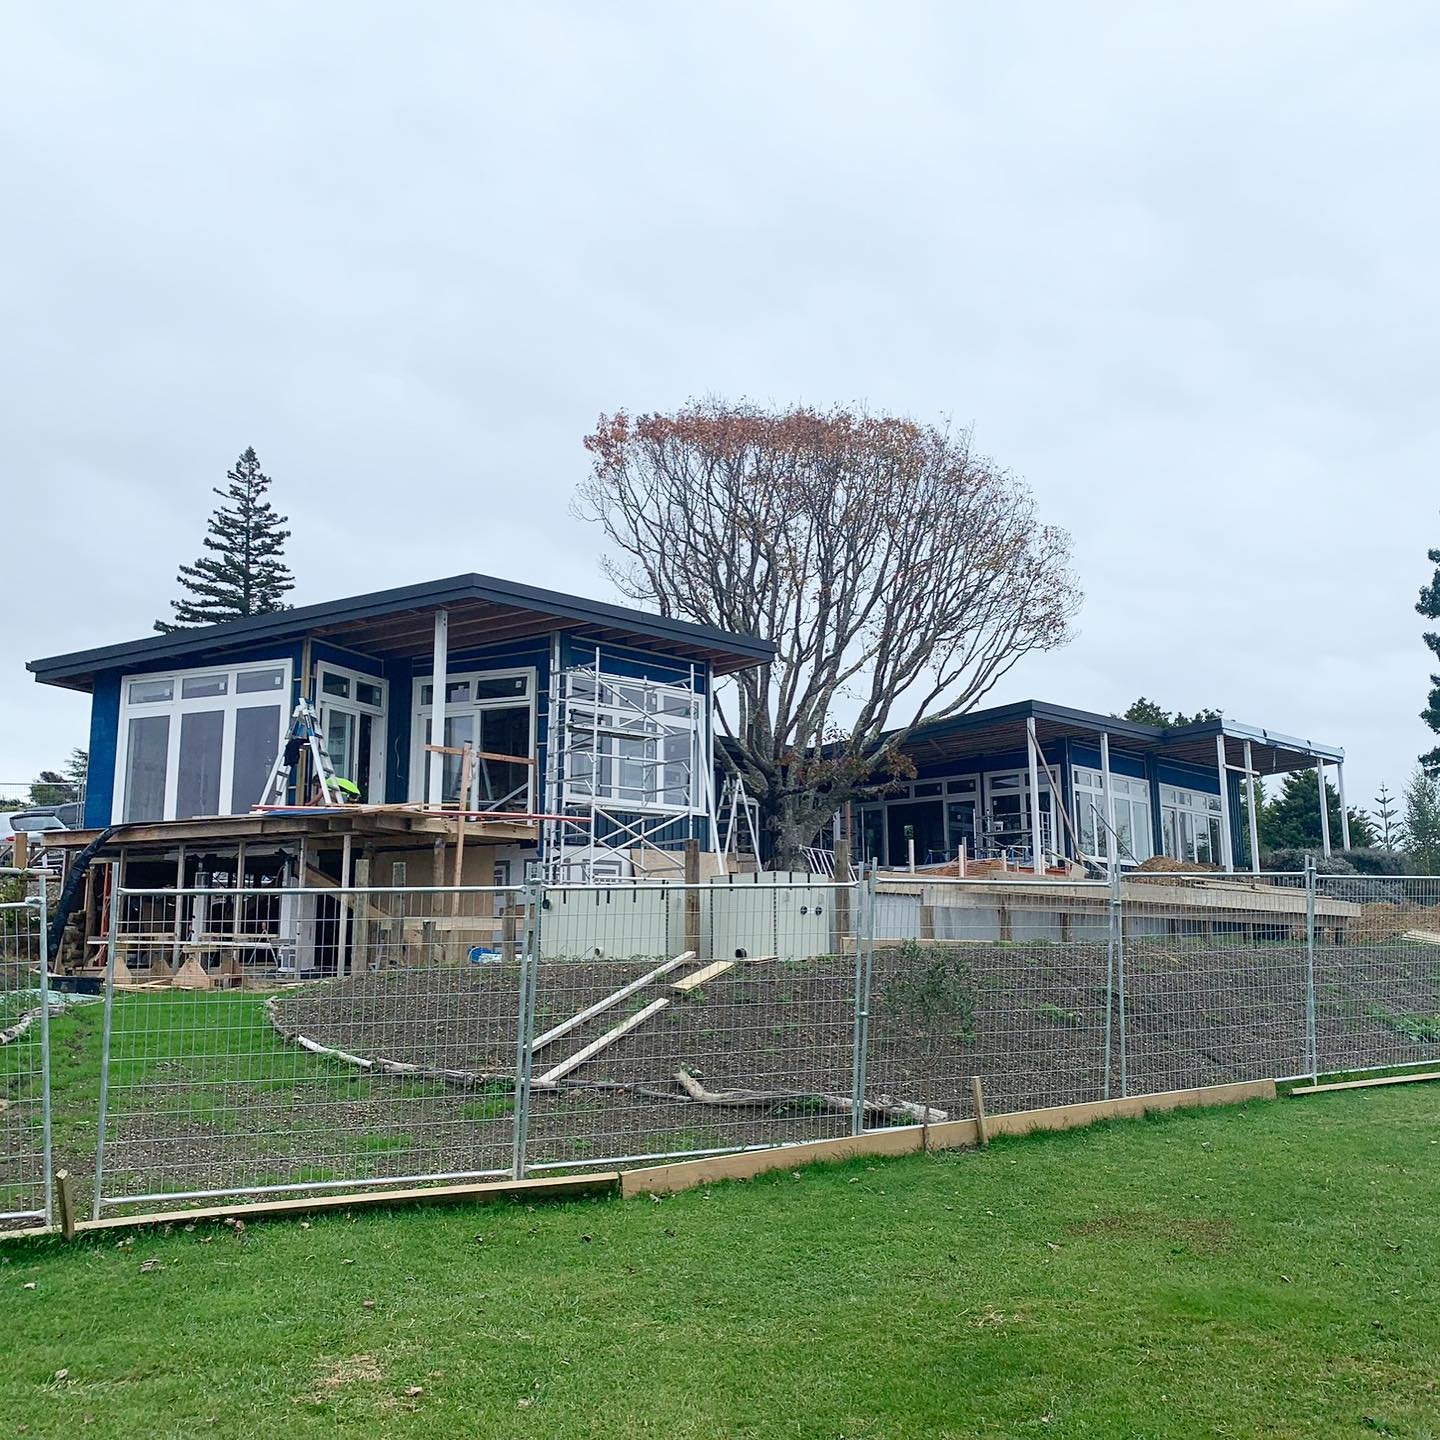 A progress update on our Tasman kiwi bach project. A gloomy site visit, but the traditional timber windows are in and board and batten cladding being installed #superbach #bachonsteroids #architecturenz #nzarchitects